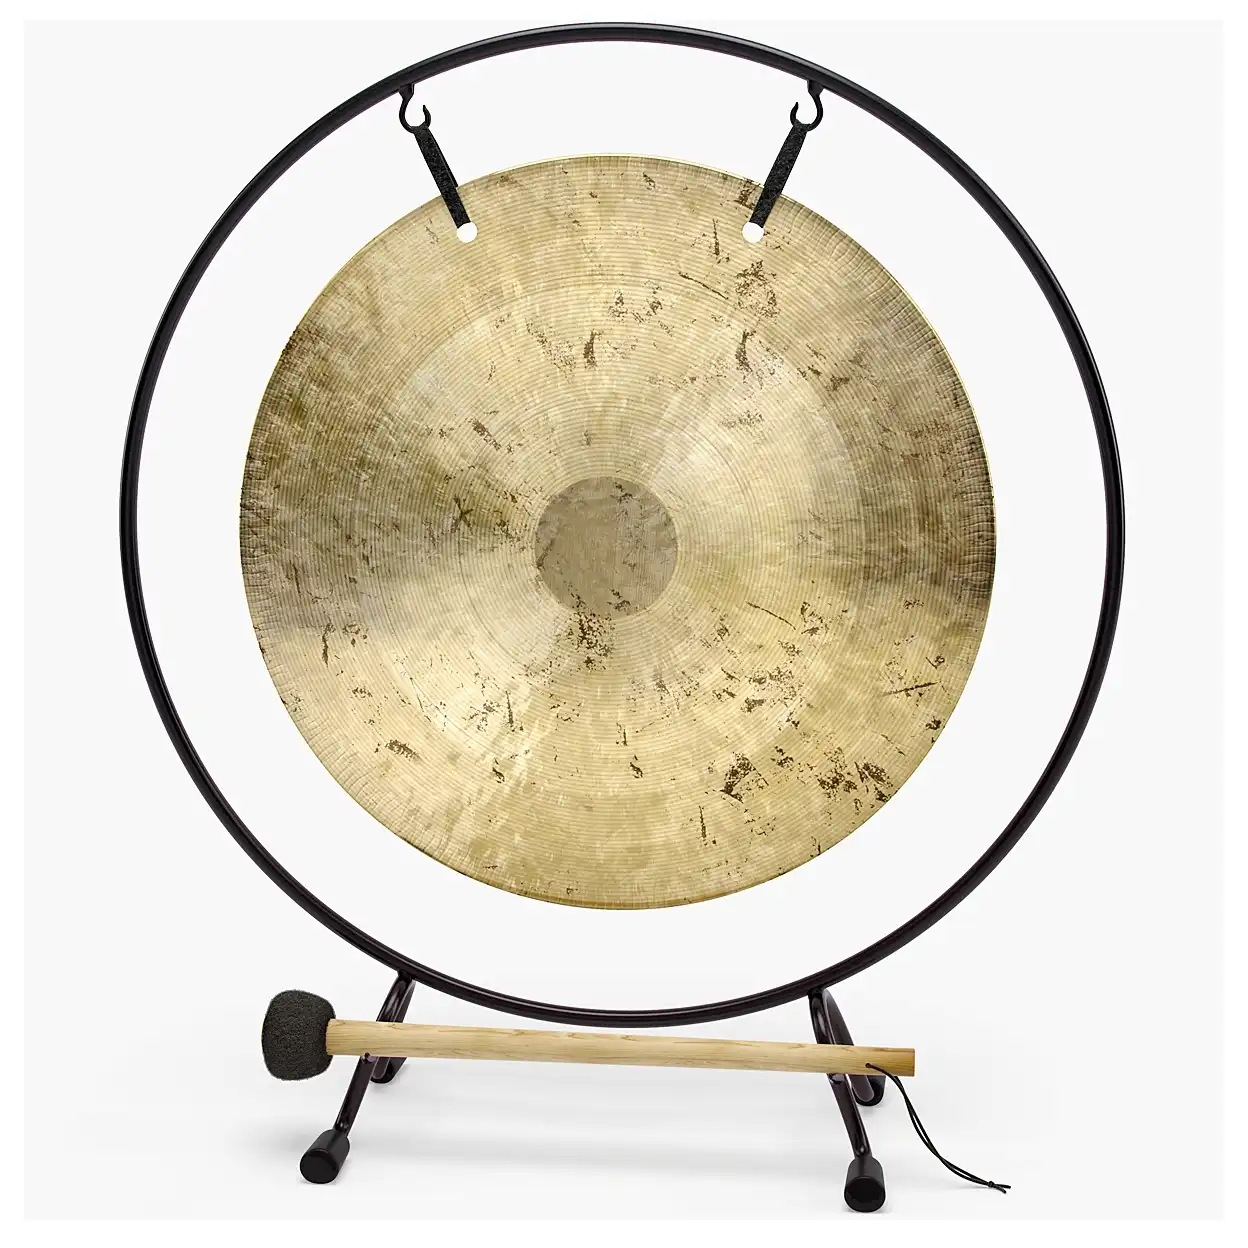 Chinese Gong In Circular Frame 3D Model